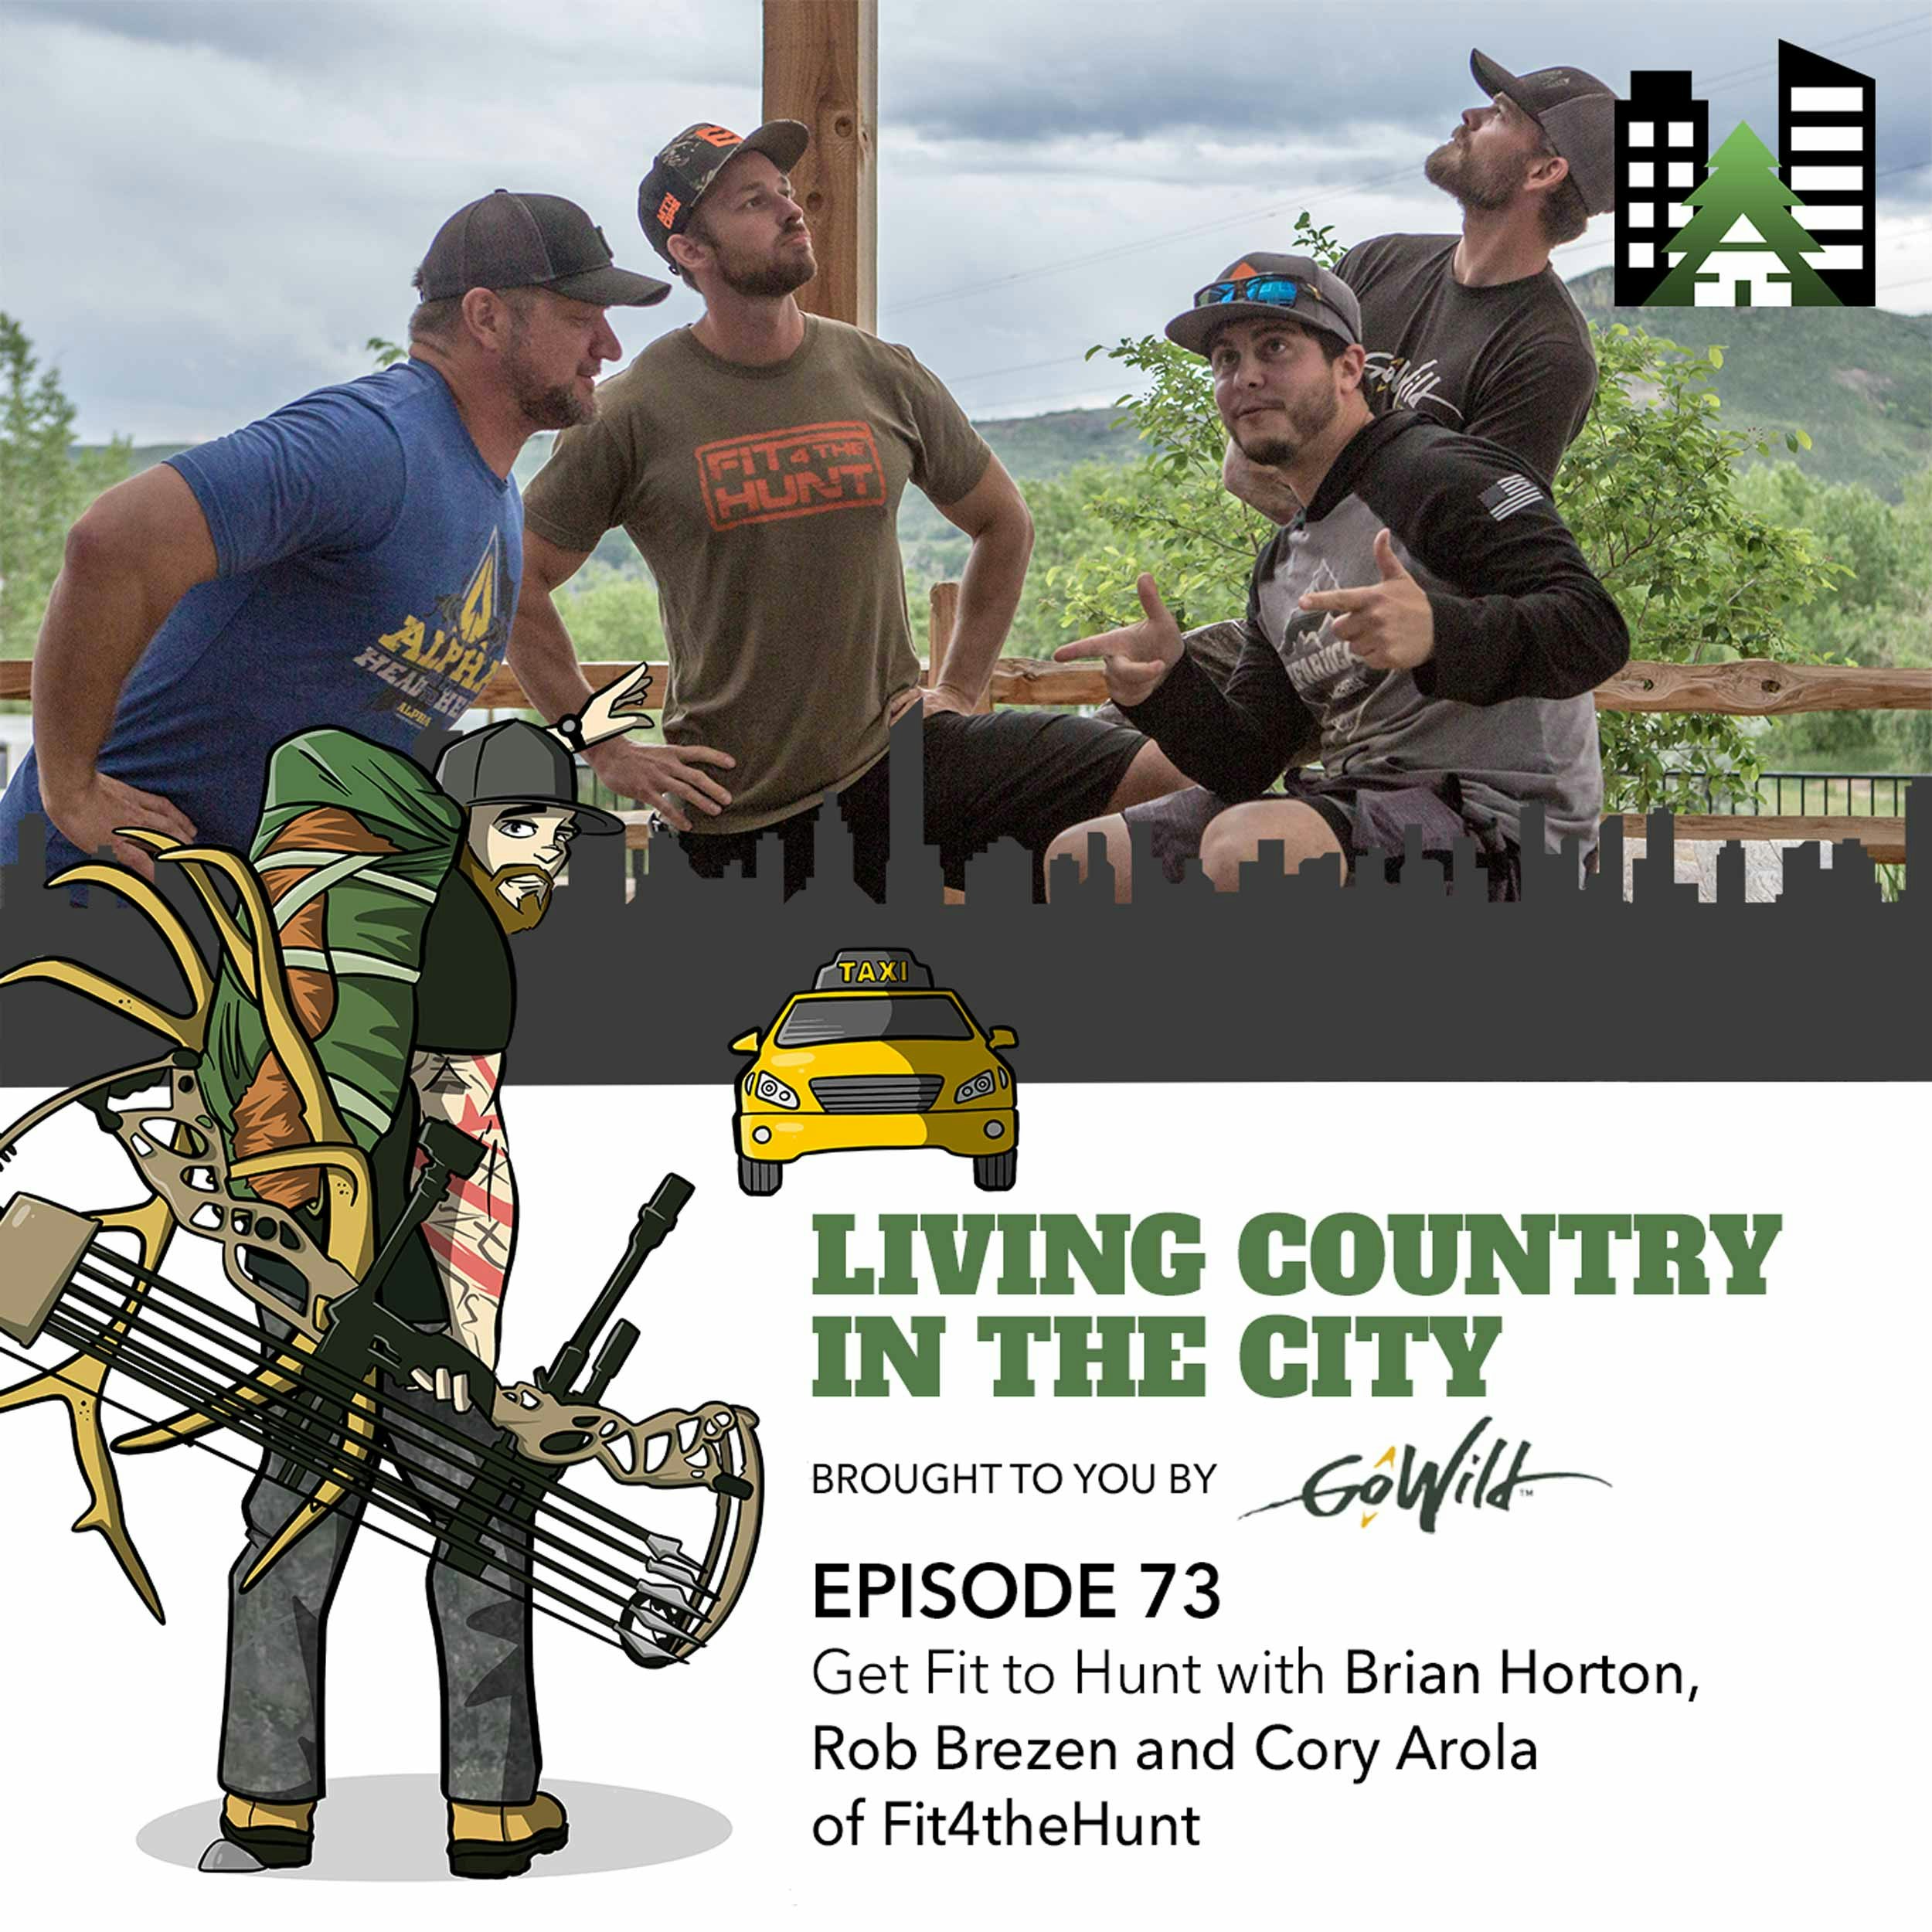 Ep 73 - Get Fit to Hunt with Brian Horton, Rob Brezen and Cory Arola of Fit4theHunt